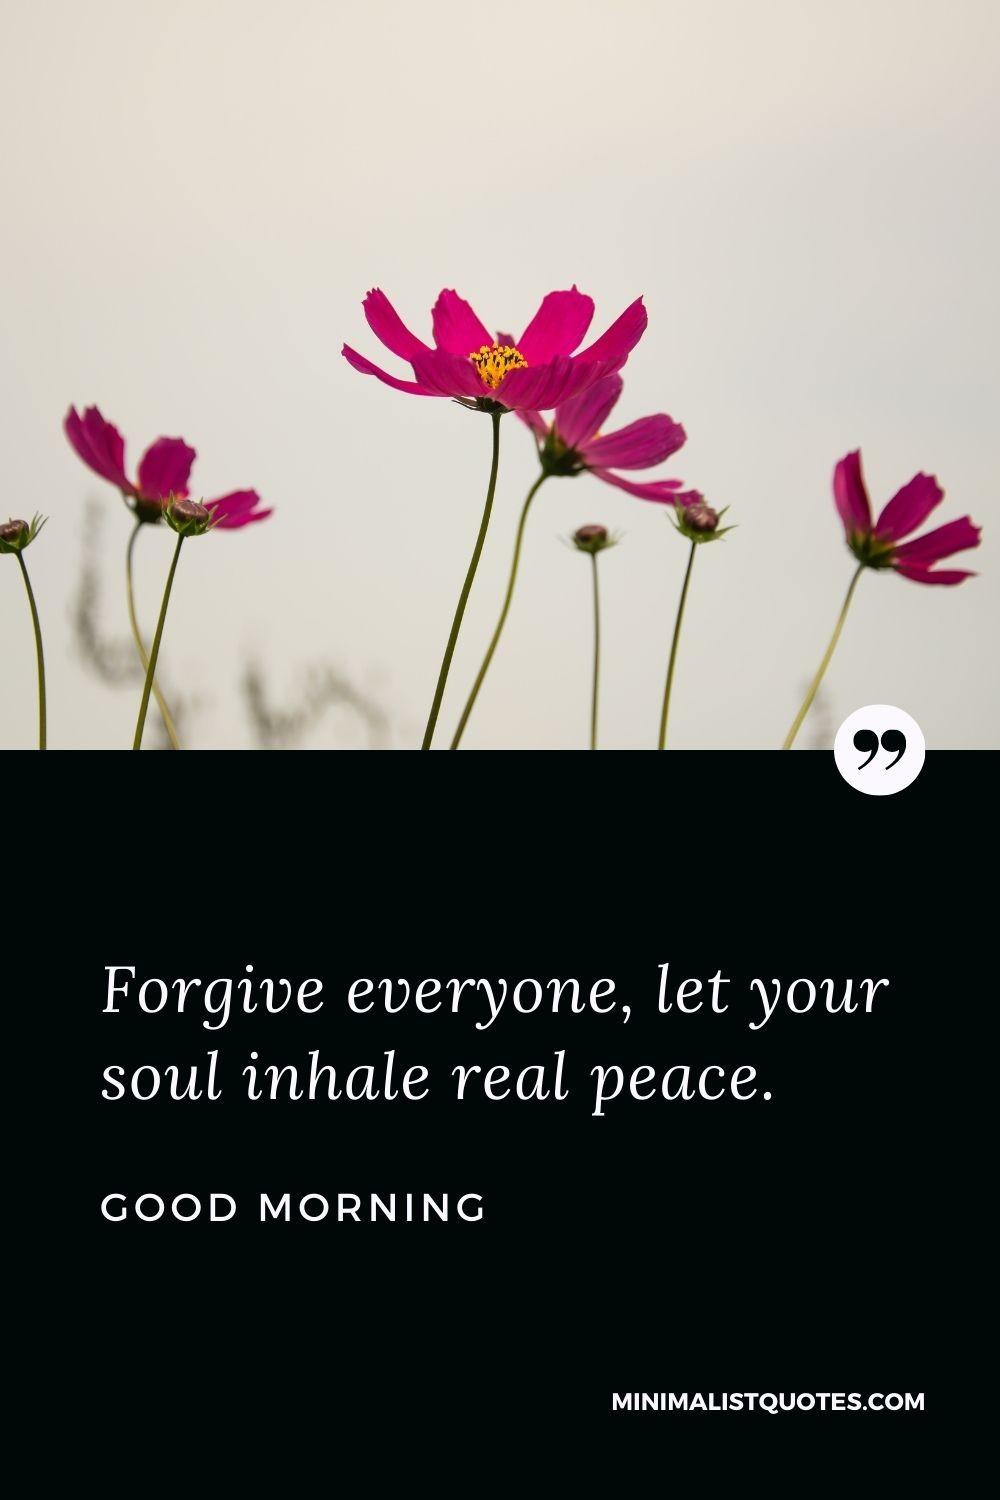 Good Morning Wish & Message With Image: Forgive everyone, let your soul inhale real peace.